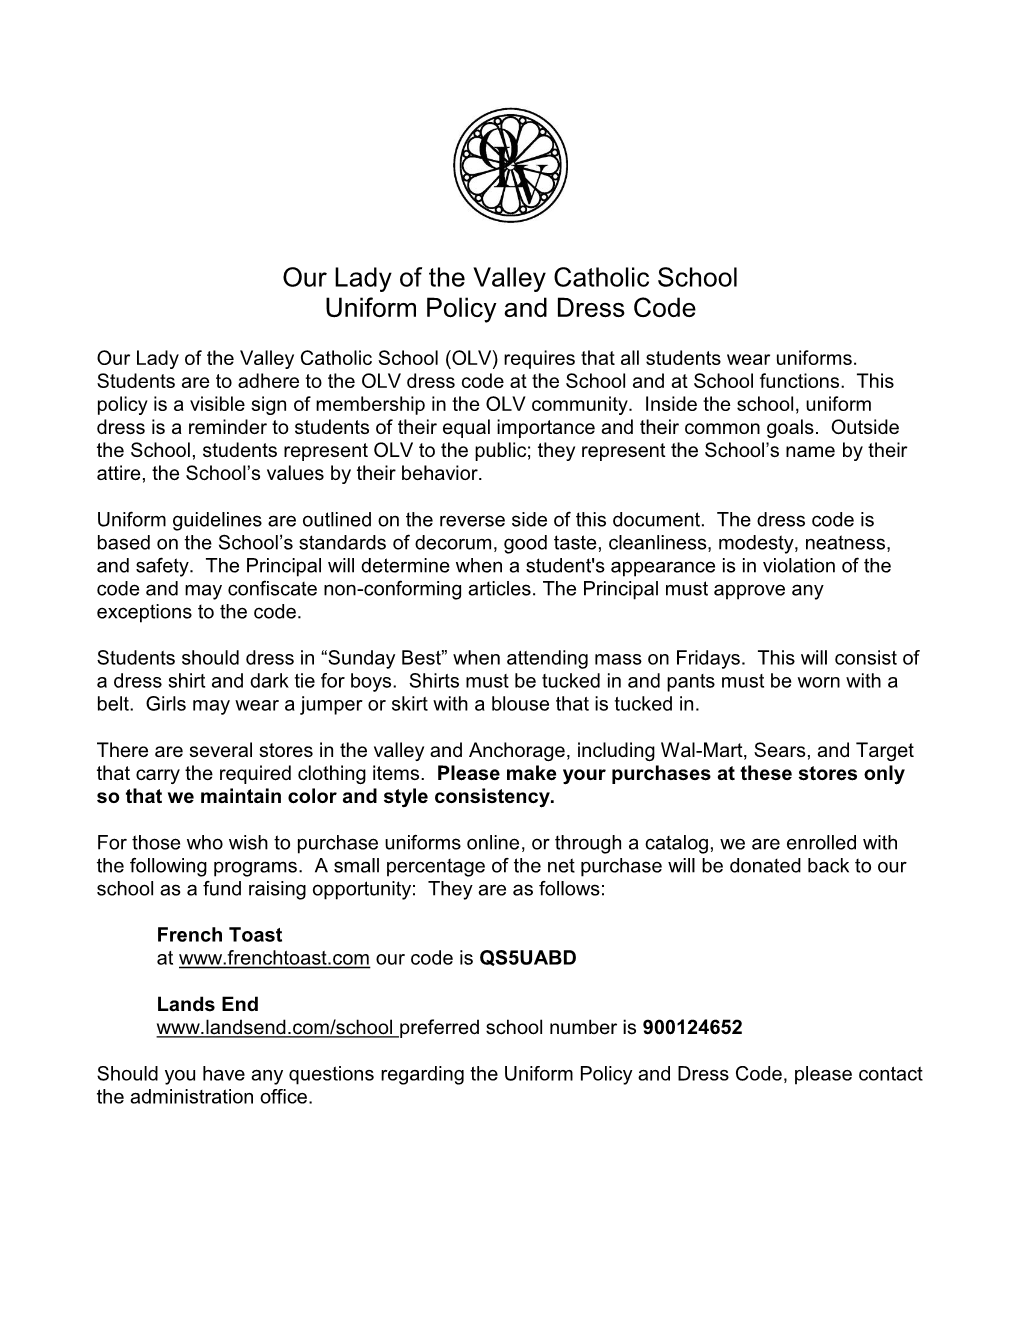 Our Lady of the Valley Catholic School Uniform Policy and Dress Code